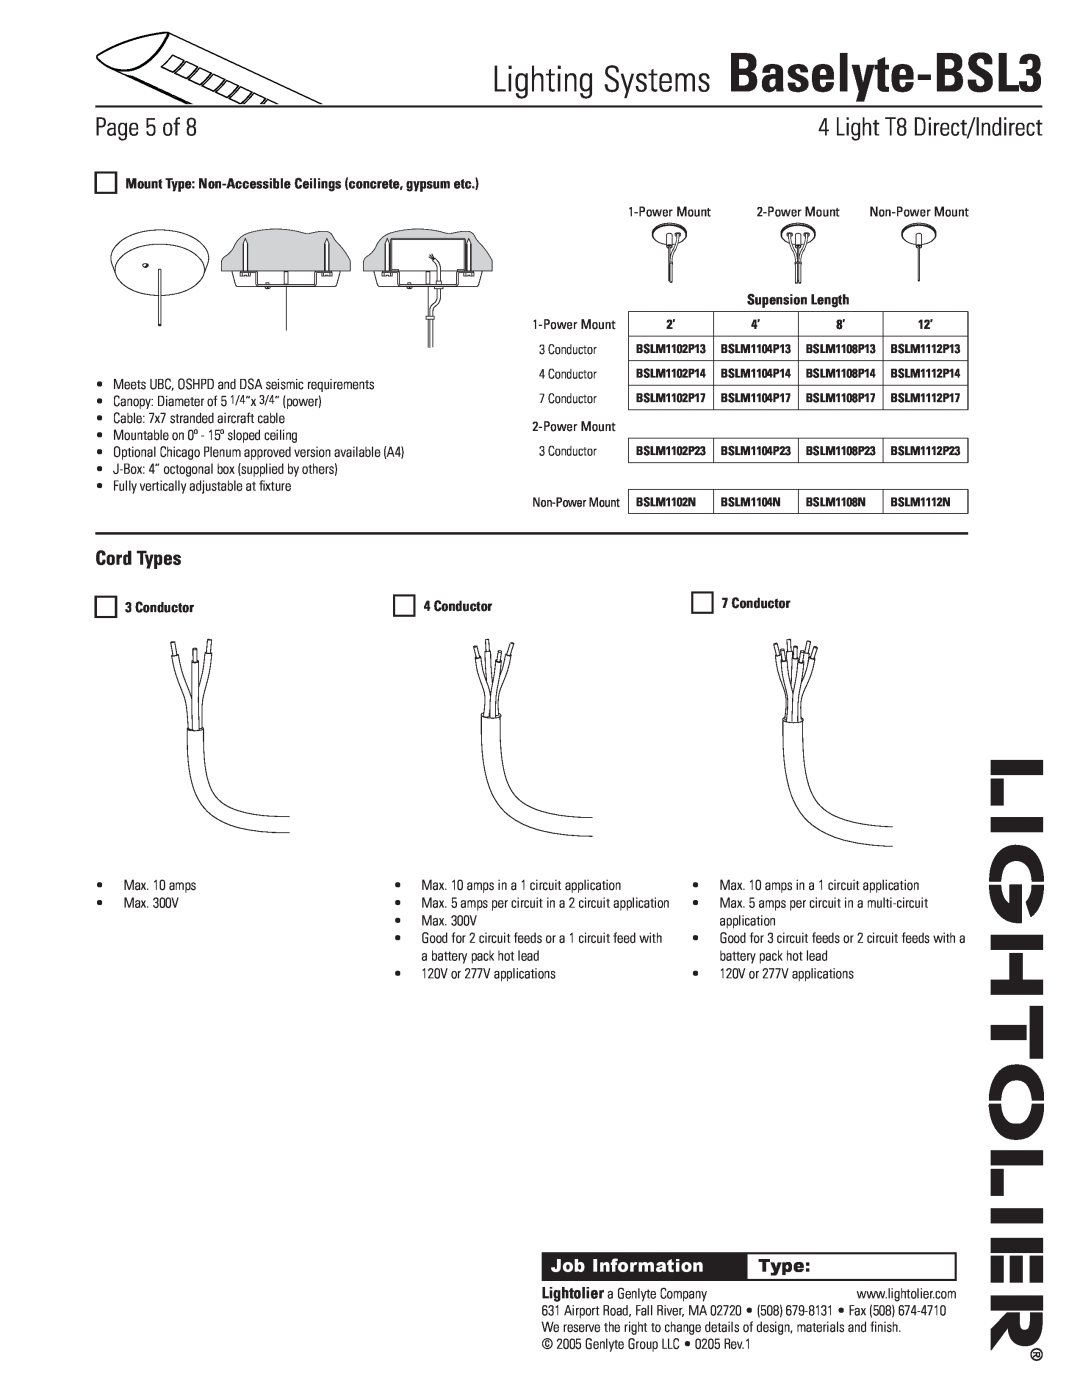 Lightolier Cord Types, Conductor, Lighting Systems Baselyte-BSL3, Page of, Light T8 Direct/Indirect, Job Information 